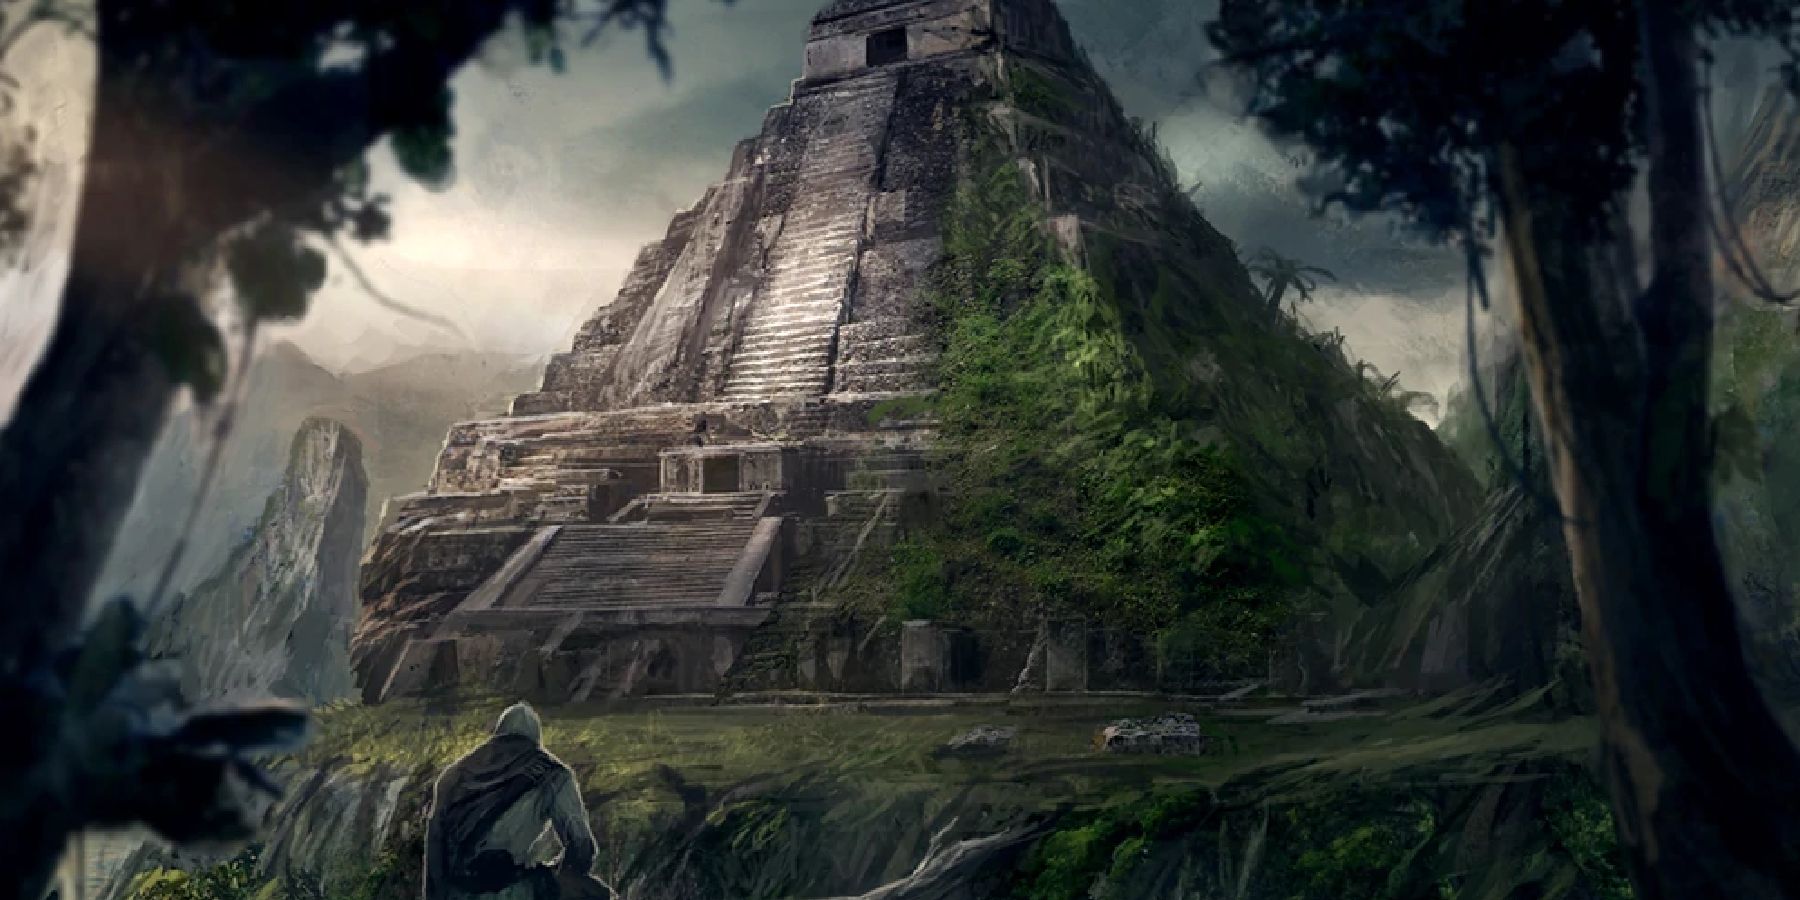 Assassin’s Creed Has Plenty of Lore in South America to
Explore